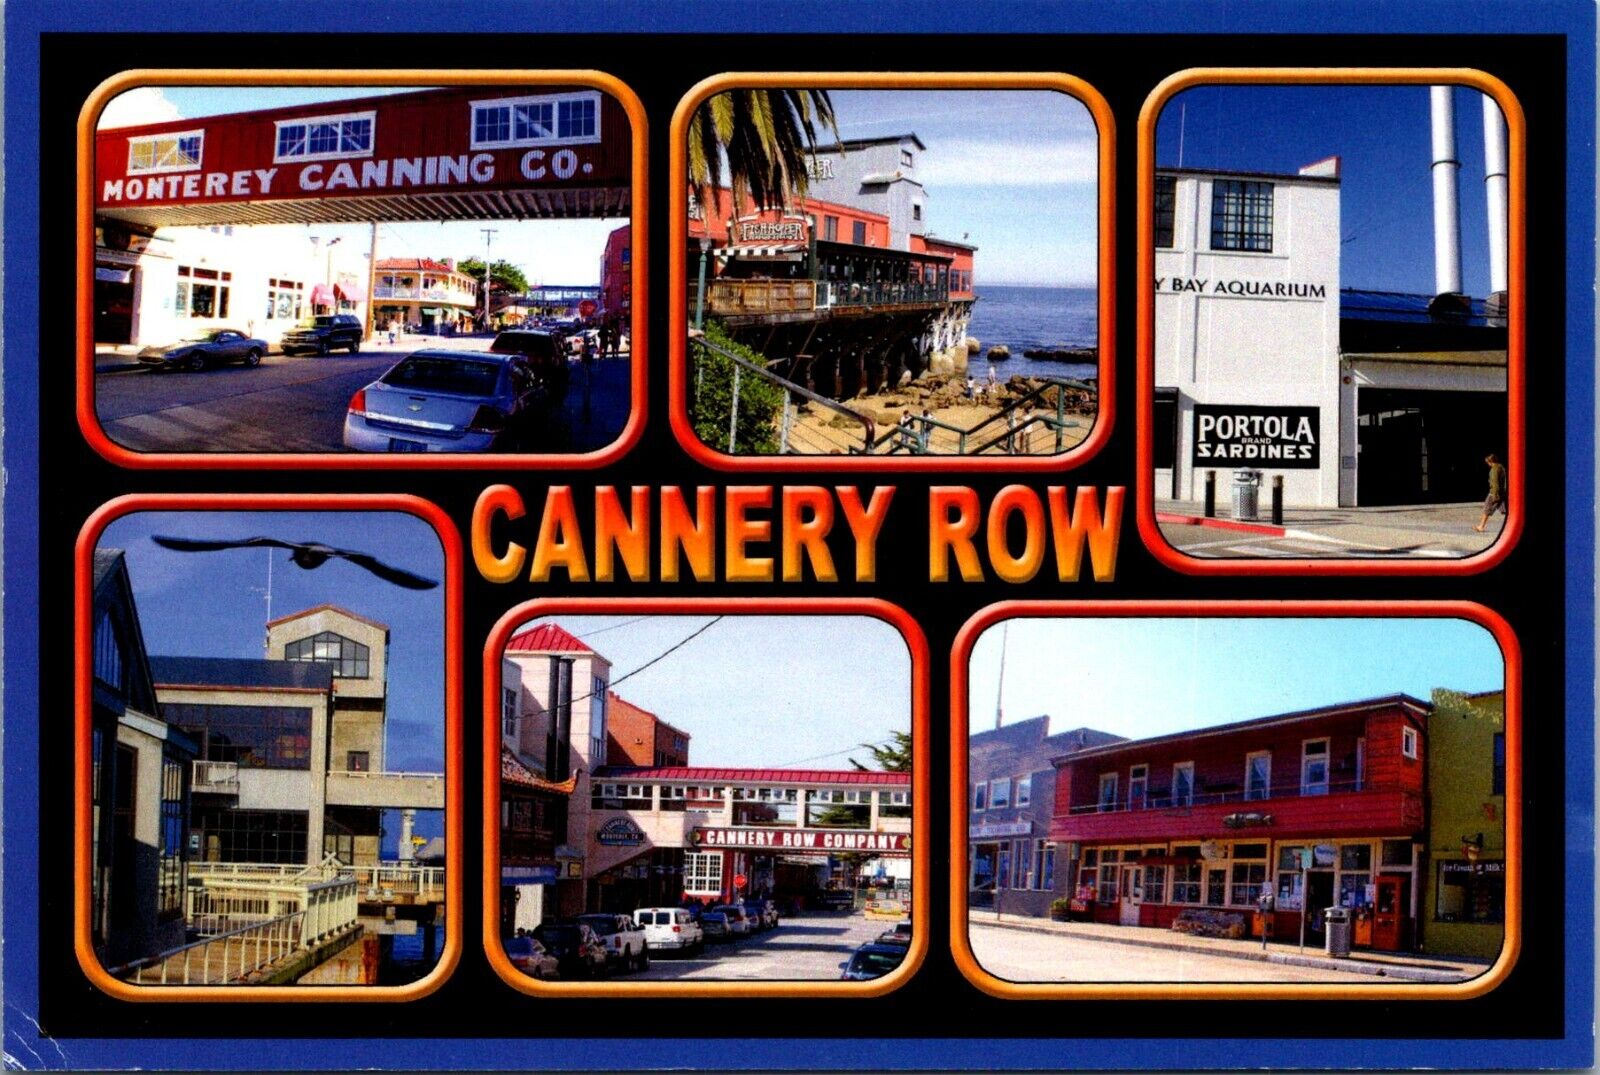 Cannery Row Monterey California historic buildings college postcard